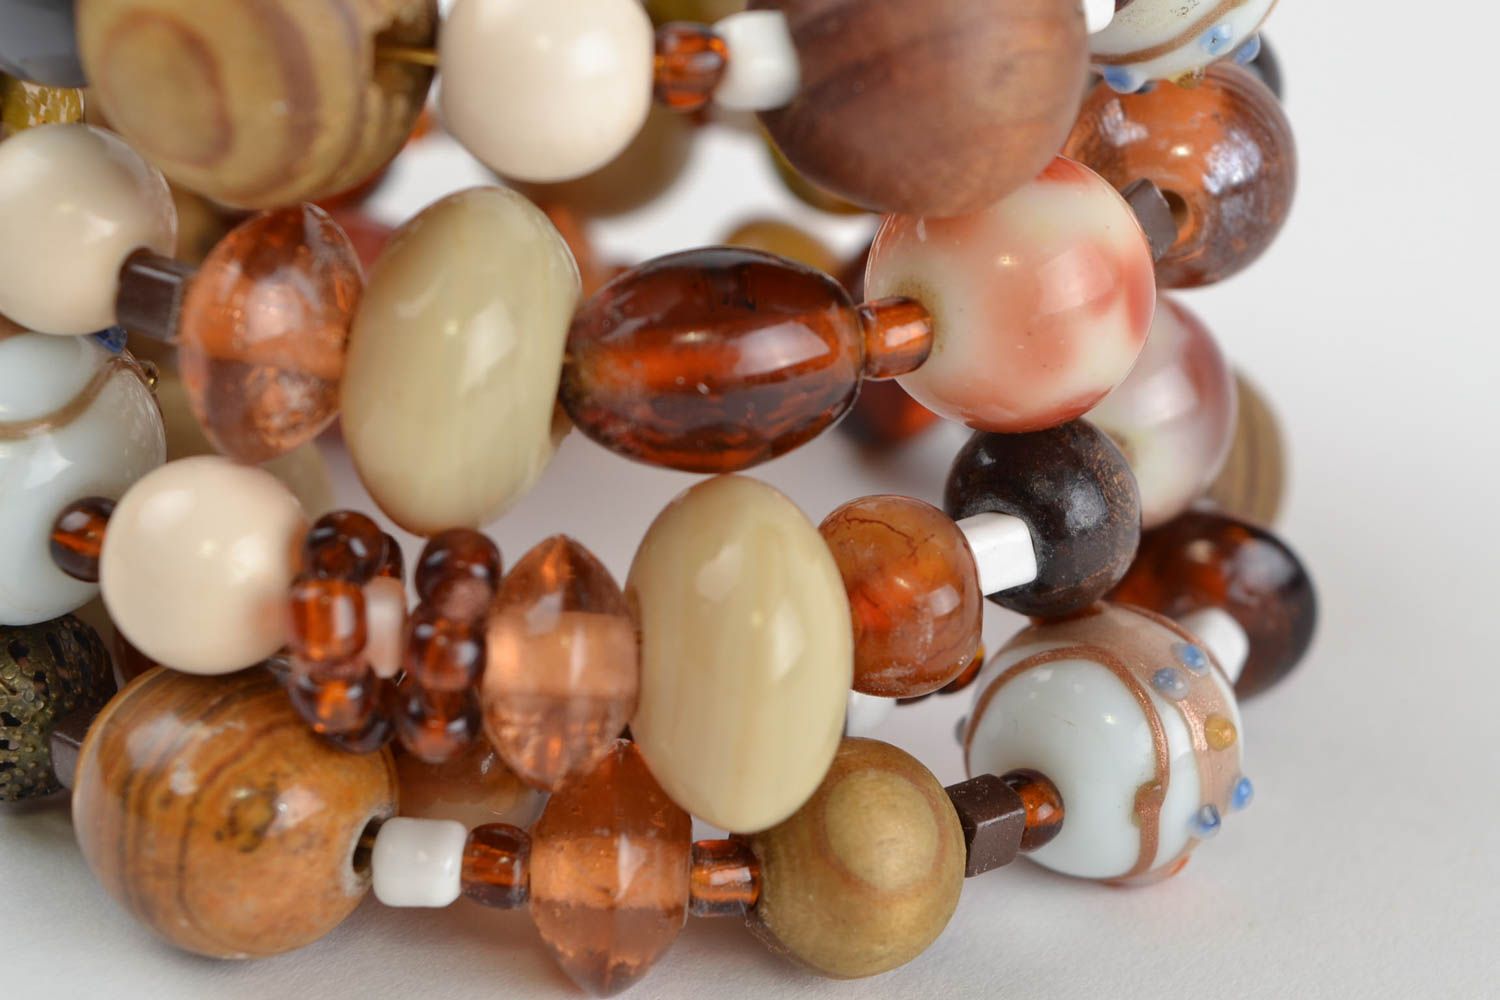 Handmade designer women's wrist bracelet with colorful wooden and glass beads photo 3